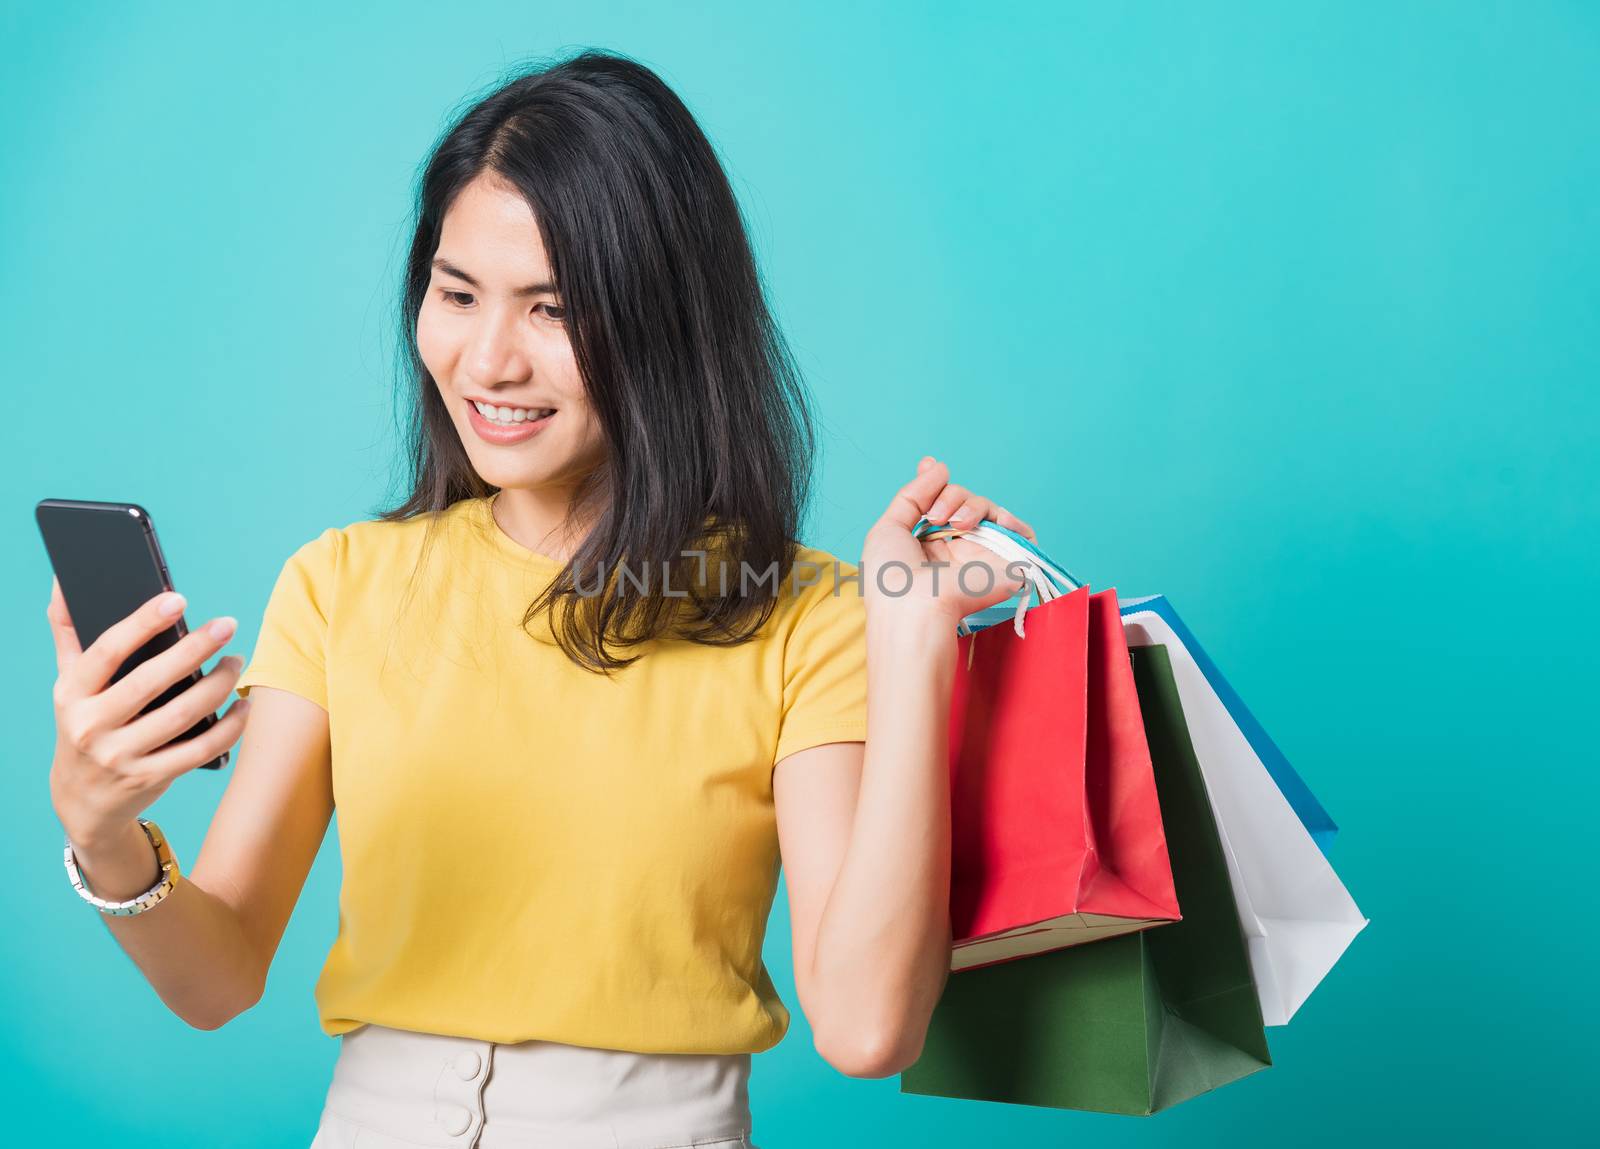 woman smile, She holding shopping bags and using a mobile phone by Sorapop